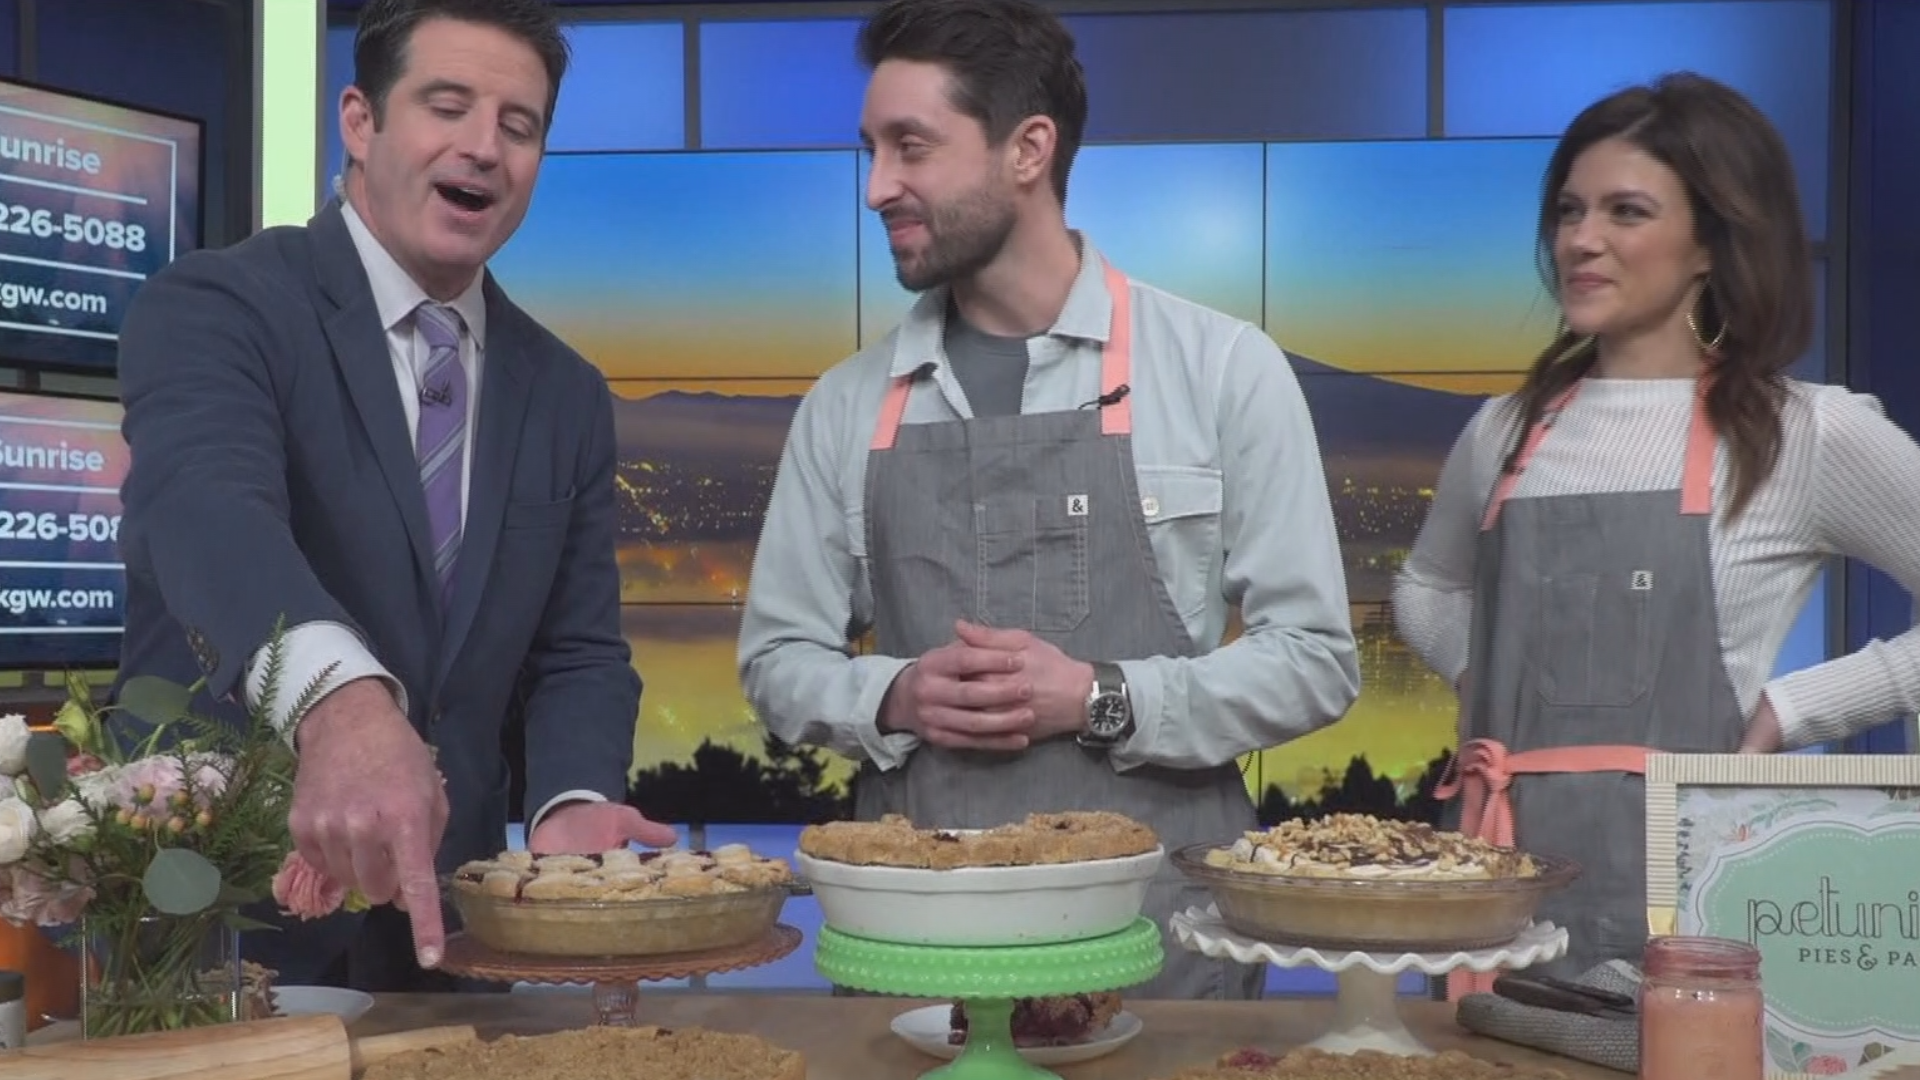 The KGW Sunrise team couldn't pass up the chance to celebrate National Pie Day on Jan. 23. The owners of Petunia's Pies & Pastries in Portland stopped by the studio.